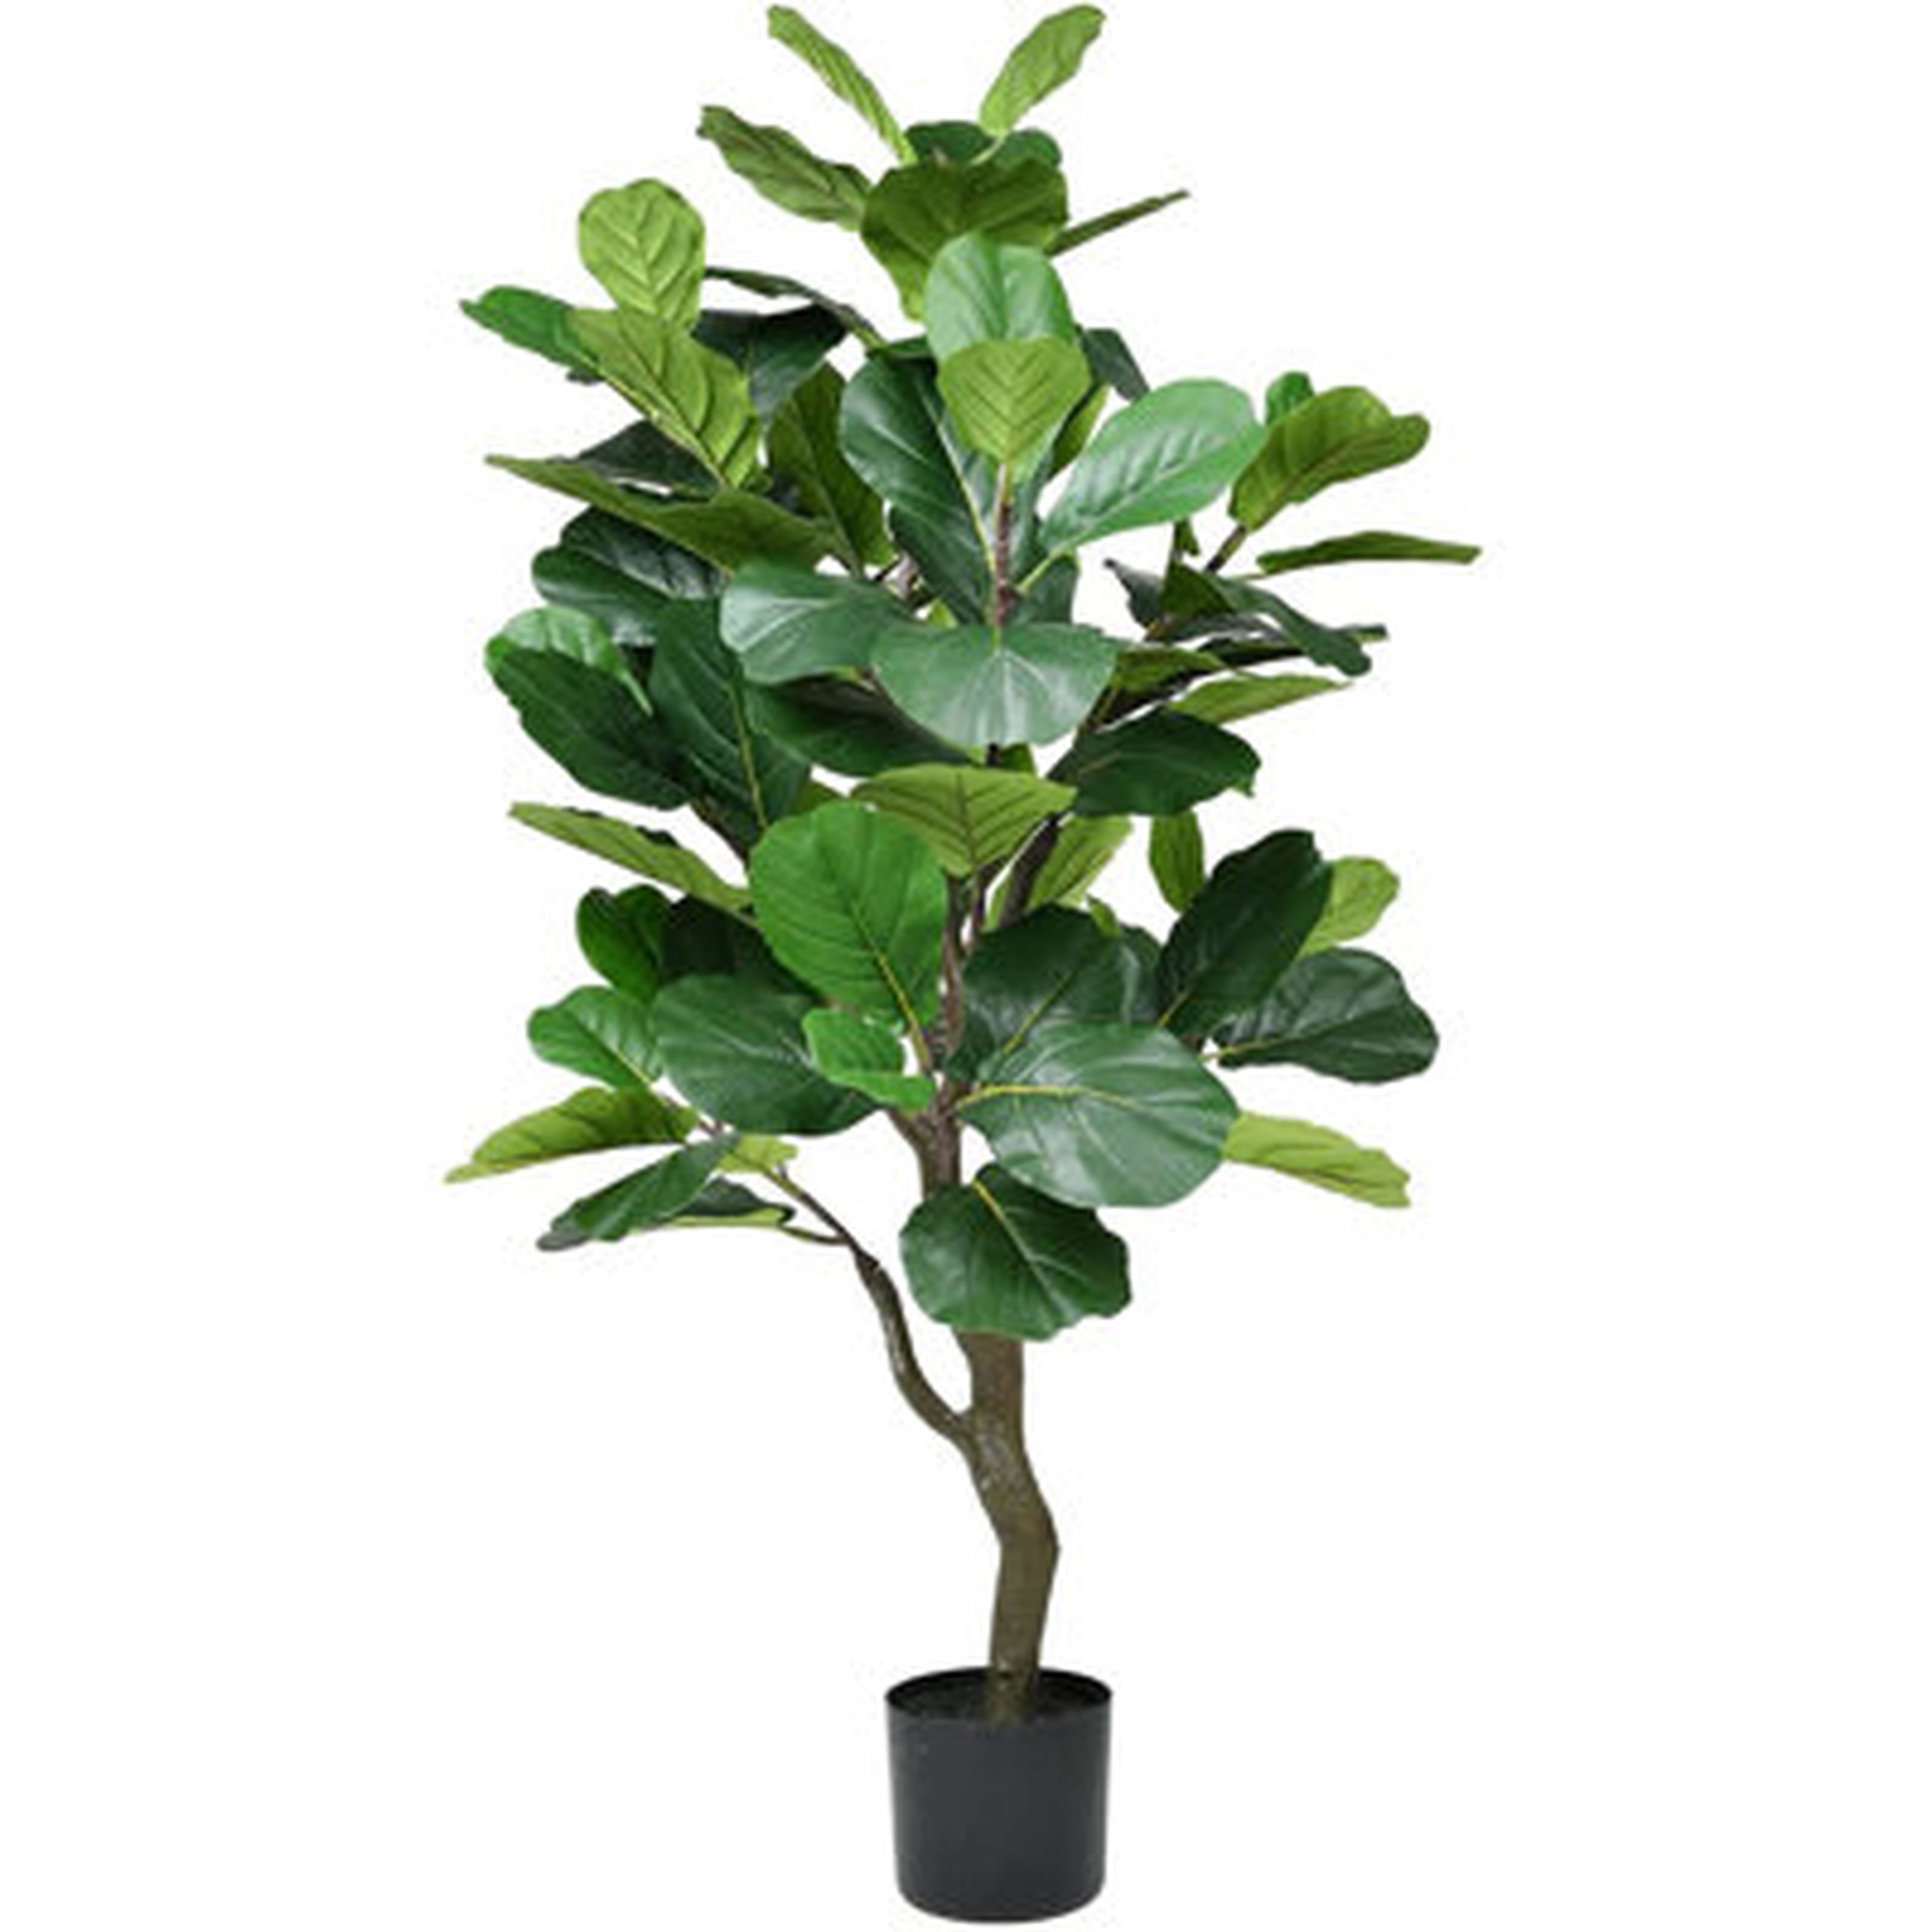 4.26Ft Artificial Plant Fiddle Leaf Fig Tree Fake Tree In Pot Natural Faux Tree Ficus Lyrata Greenery Plant Indoor Outdoor Decor For House Home Office - Wayfair